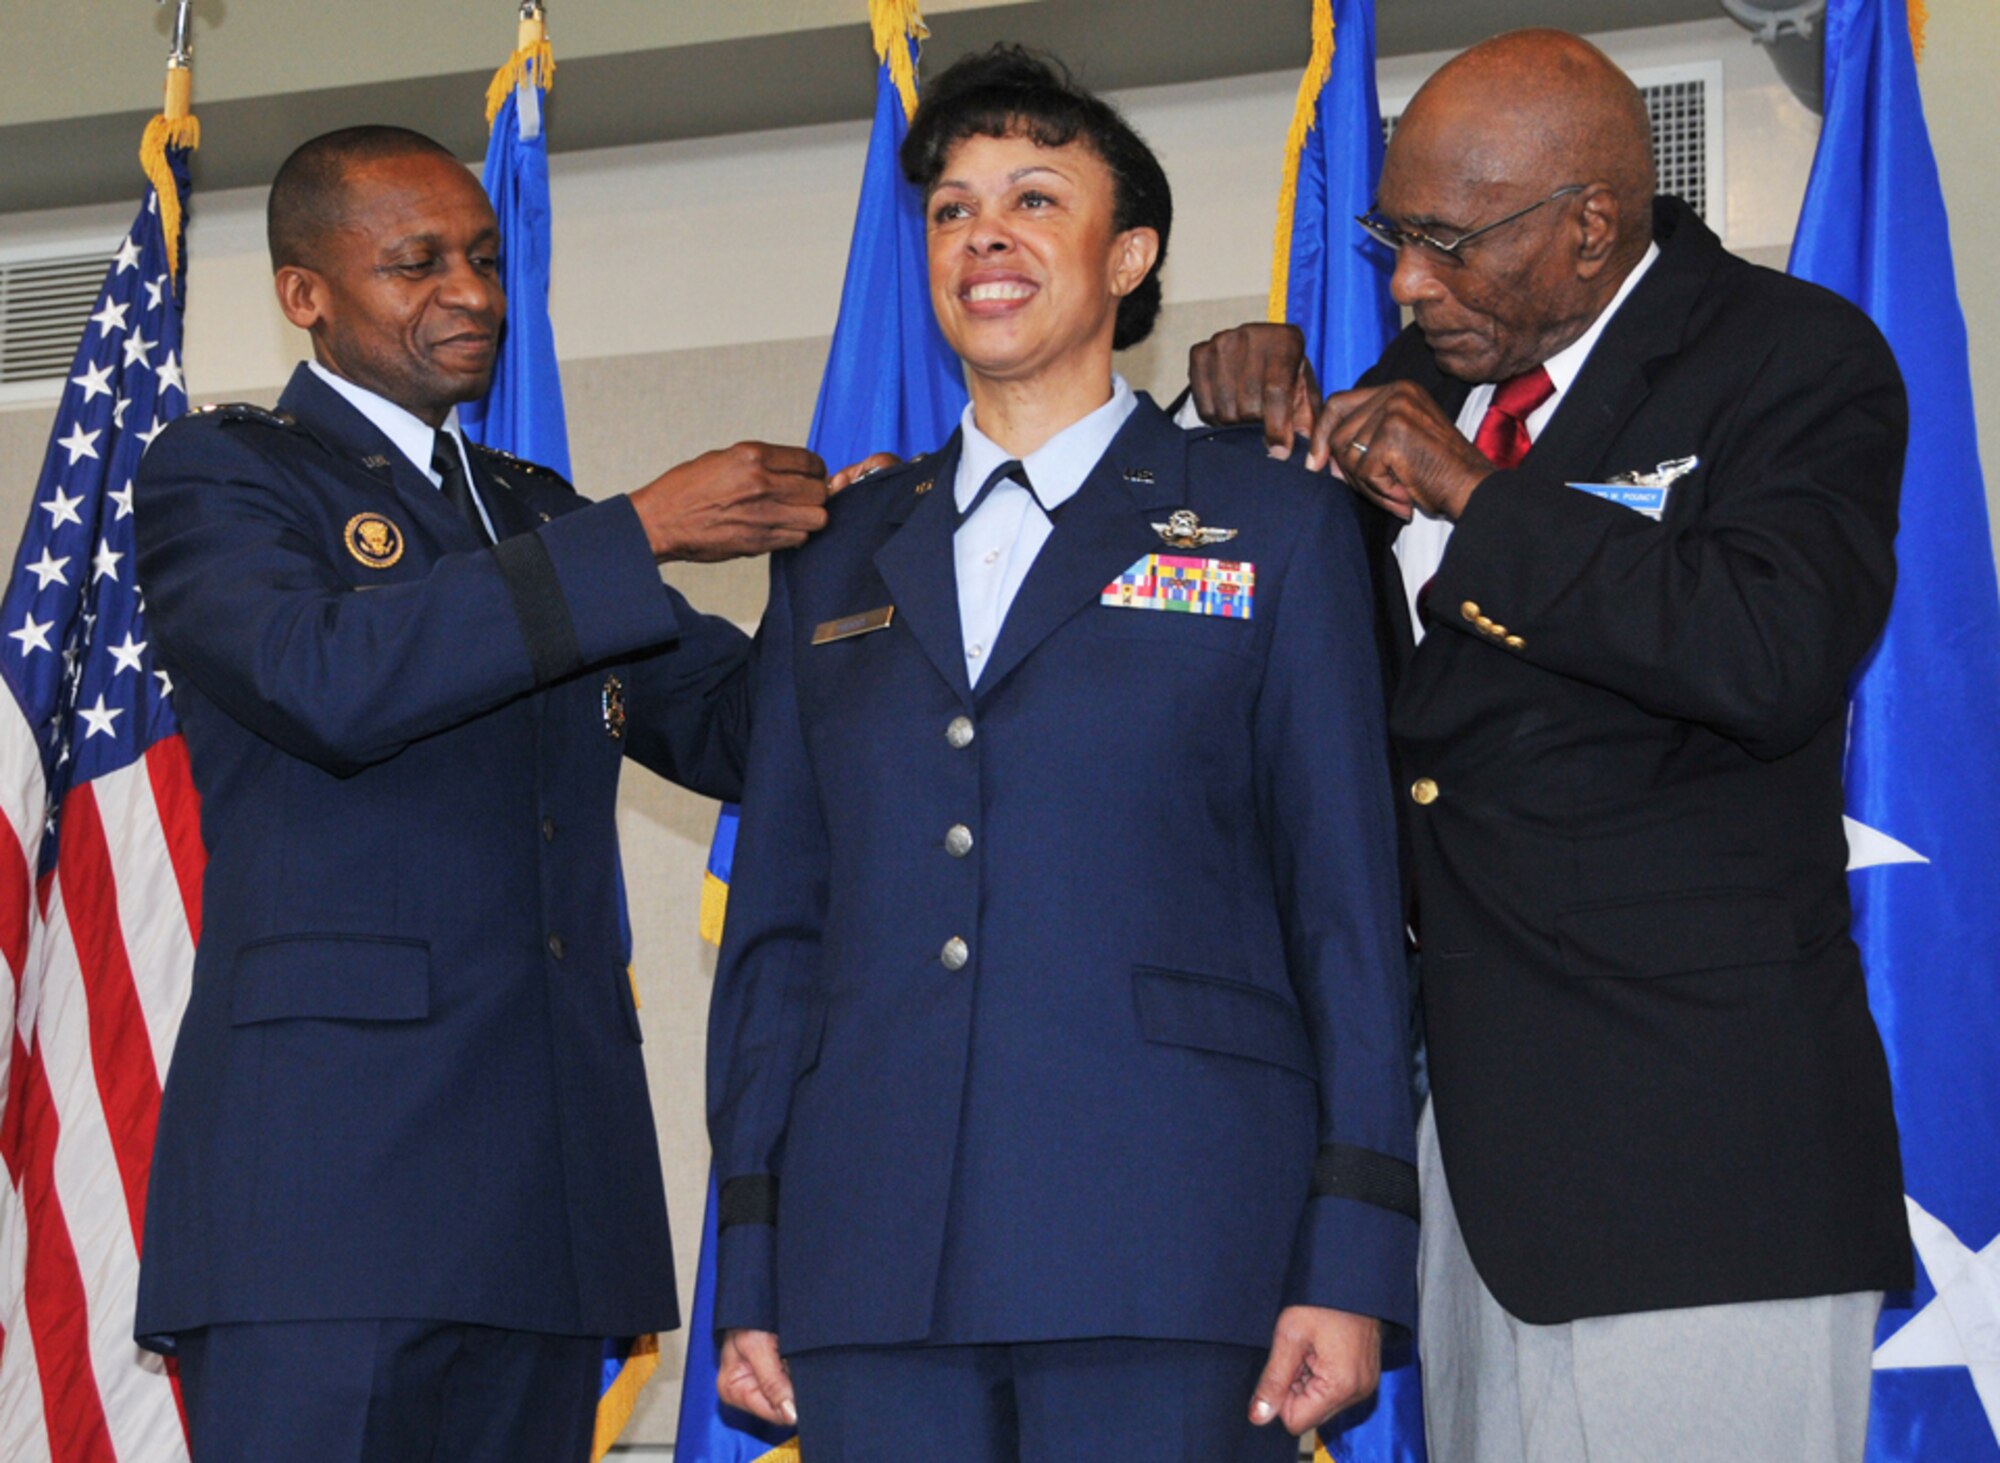 Gen. Darren W. McDew, Air Mobility Command commander, and Hillard W. Pouncy, an original Tuskegee Airman, pin stars on Harris during her recent promotion ceremony. (Staff Sgt. Jaclyn McDonald)